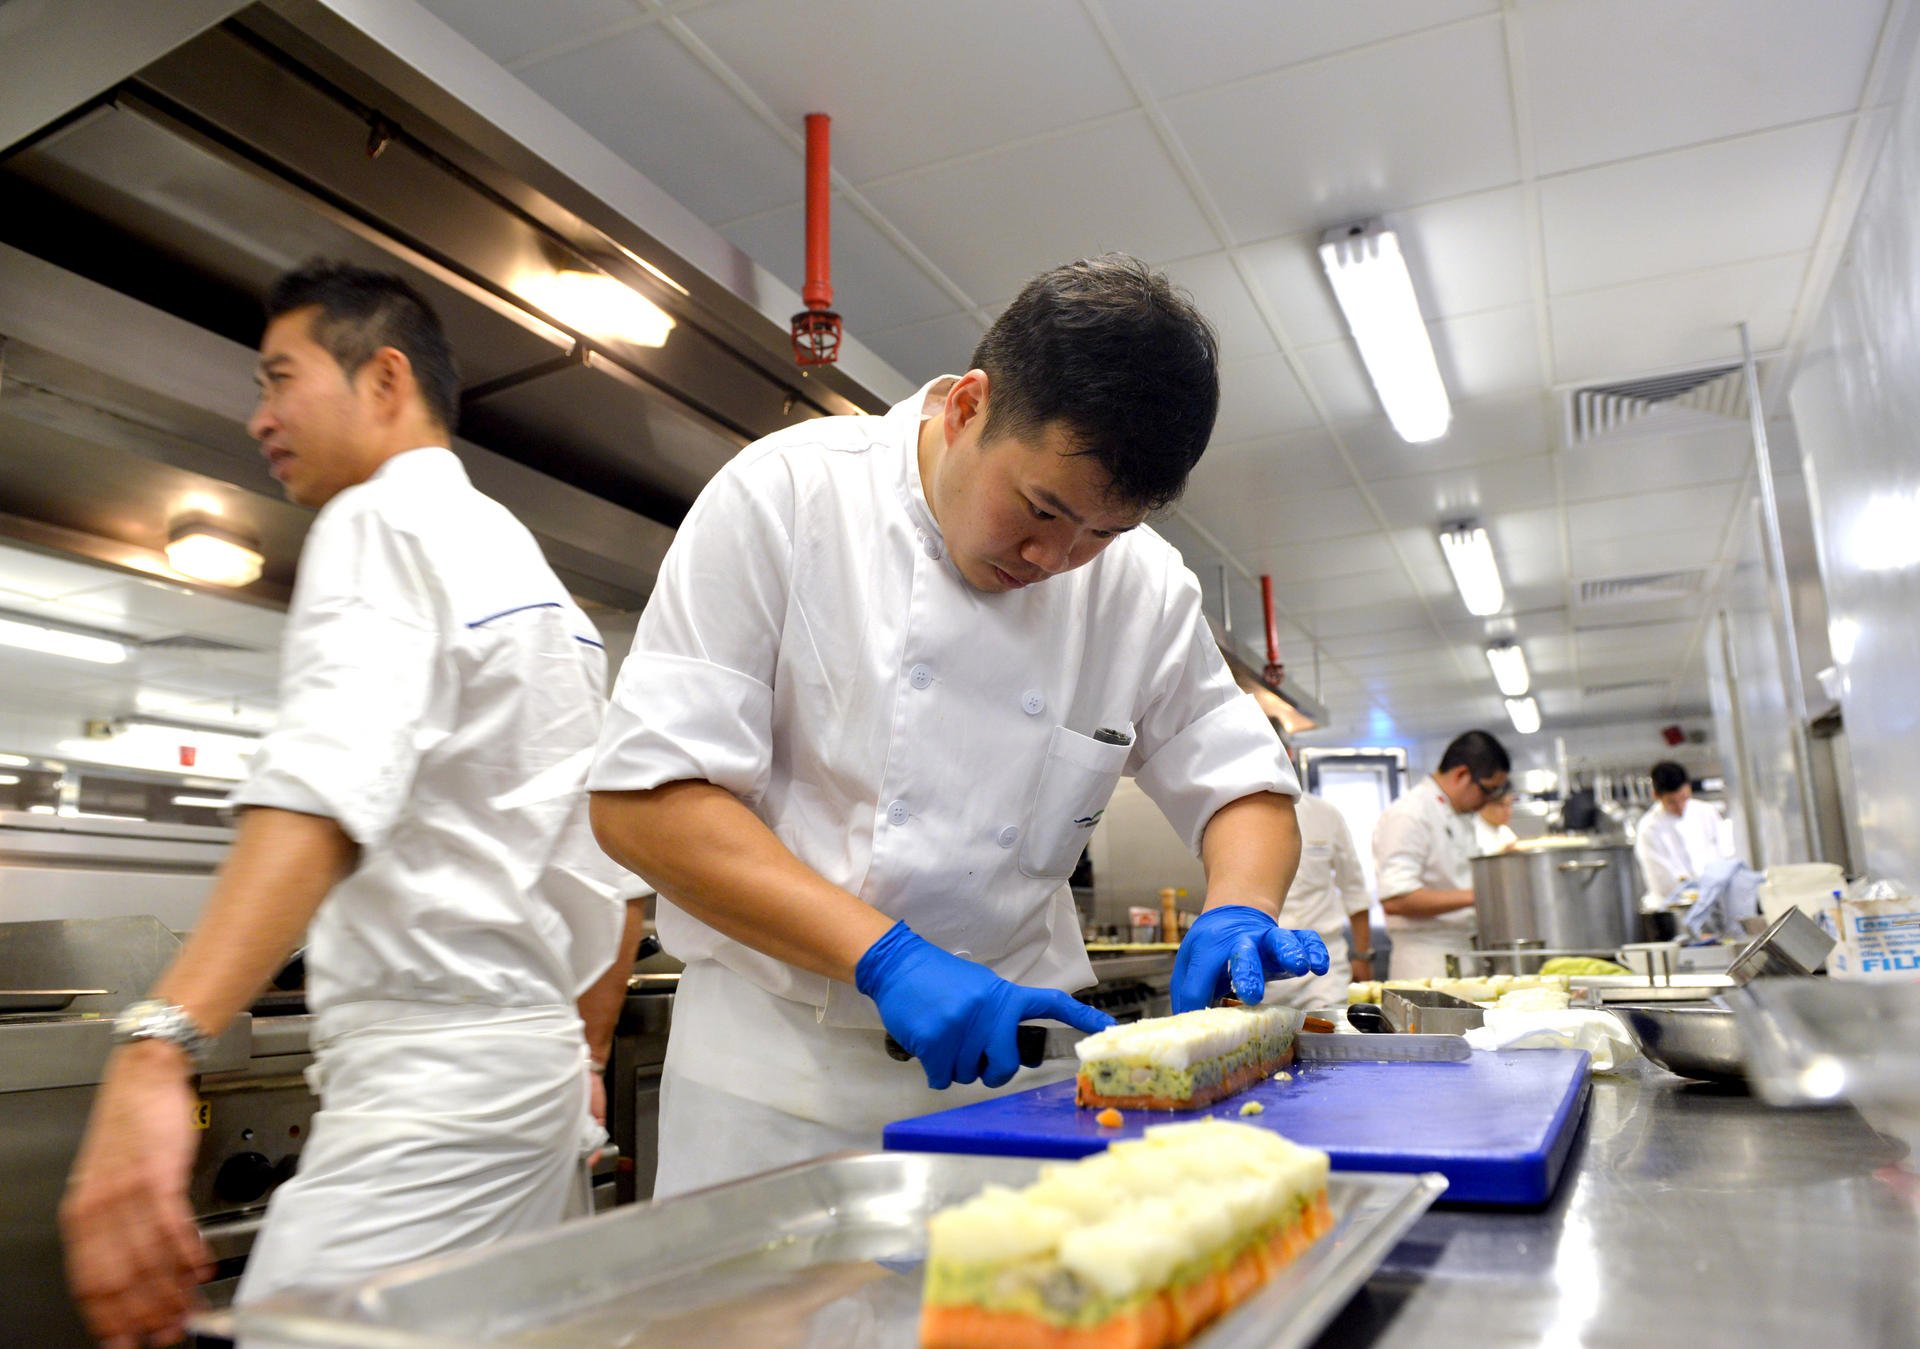 Chefs from the Hong Kong team prepare for the Culinary Olympics at their base in Pok Fu Lam. Photo: Dickson Lee